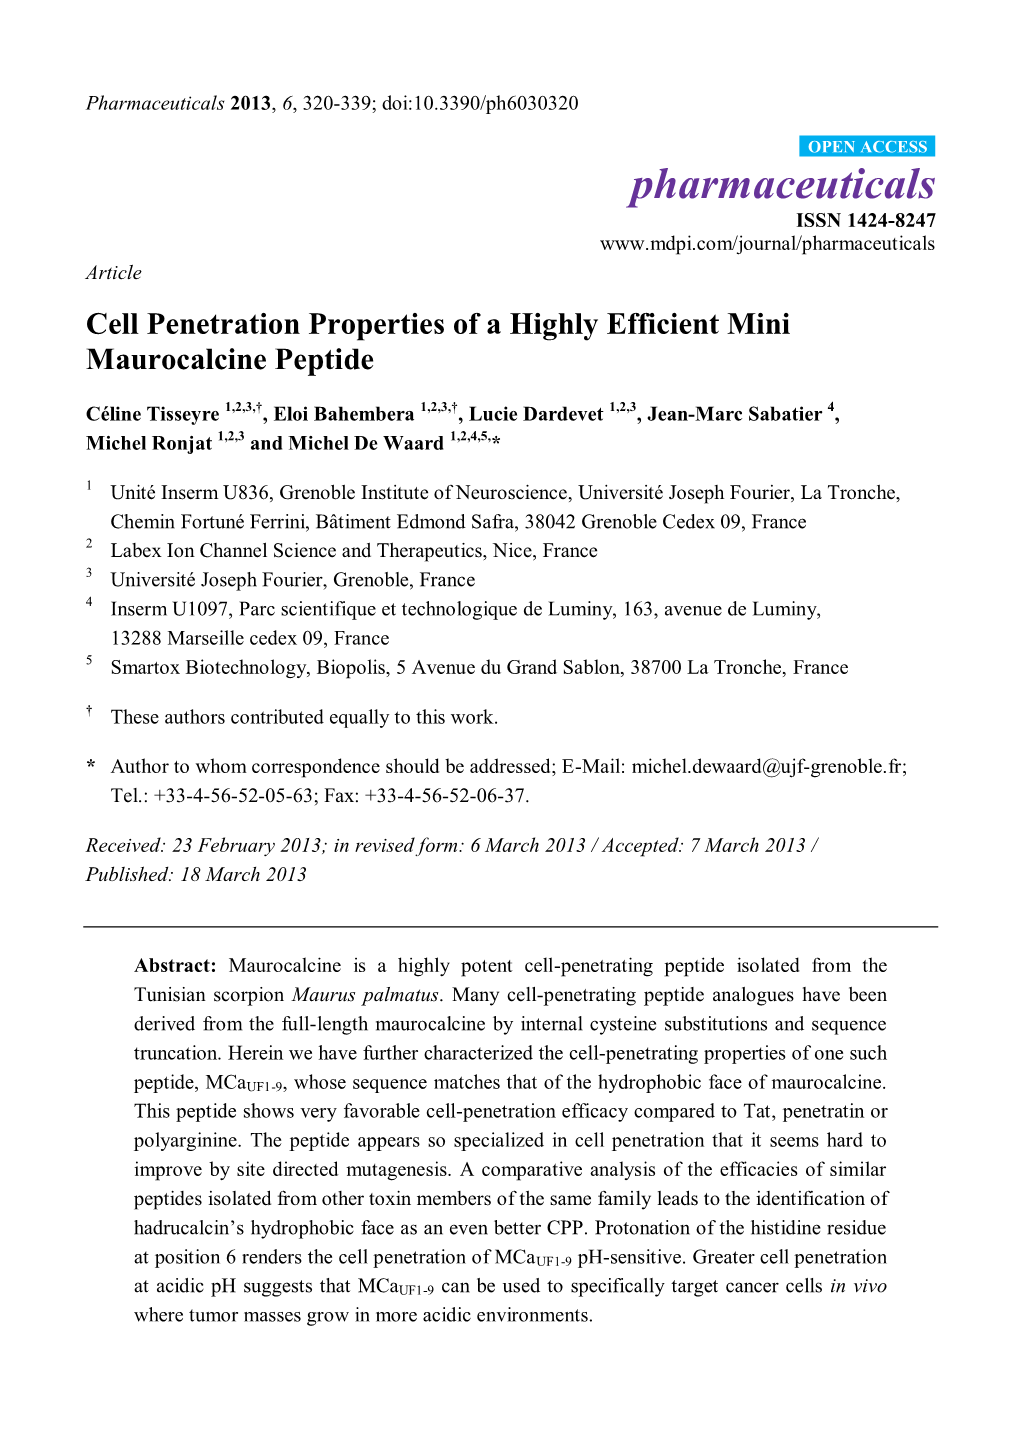 Cell Penetration Properties of a Highly Efficient Mini Maurocalcine Peptide